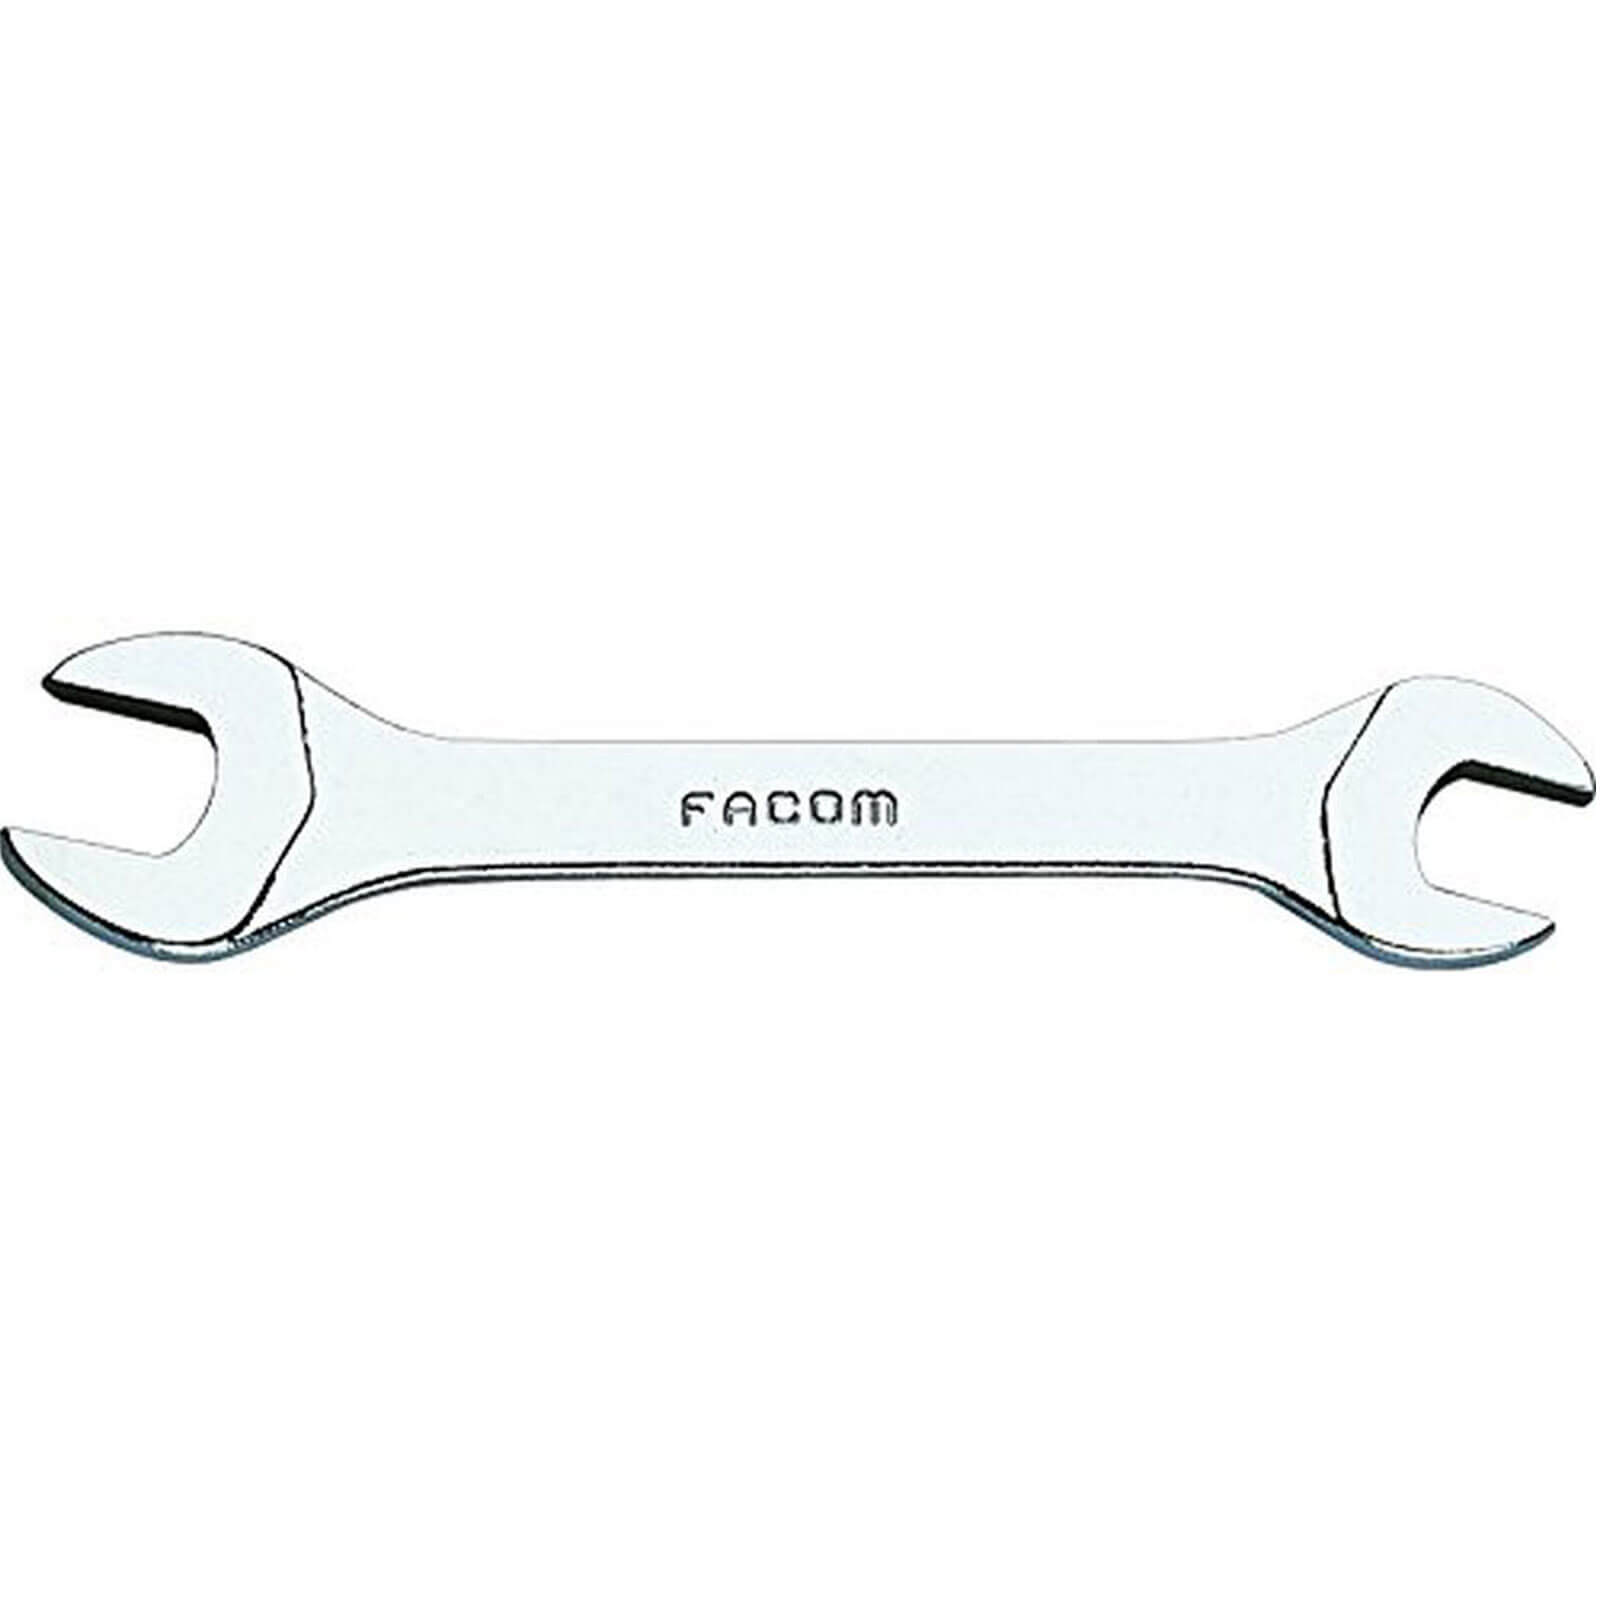 Image of Facom Miniature Open End Spanner Metric 8mm x 9mm